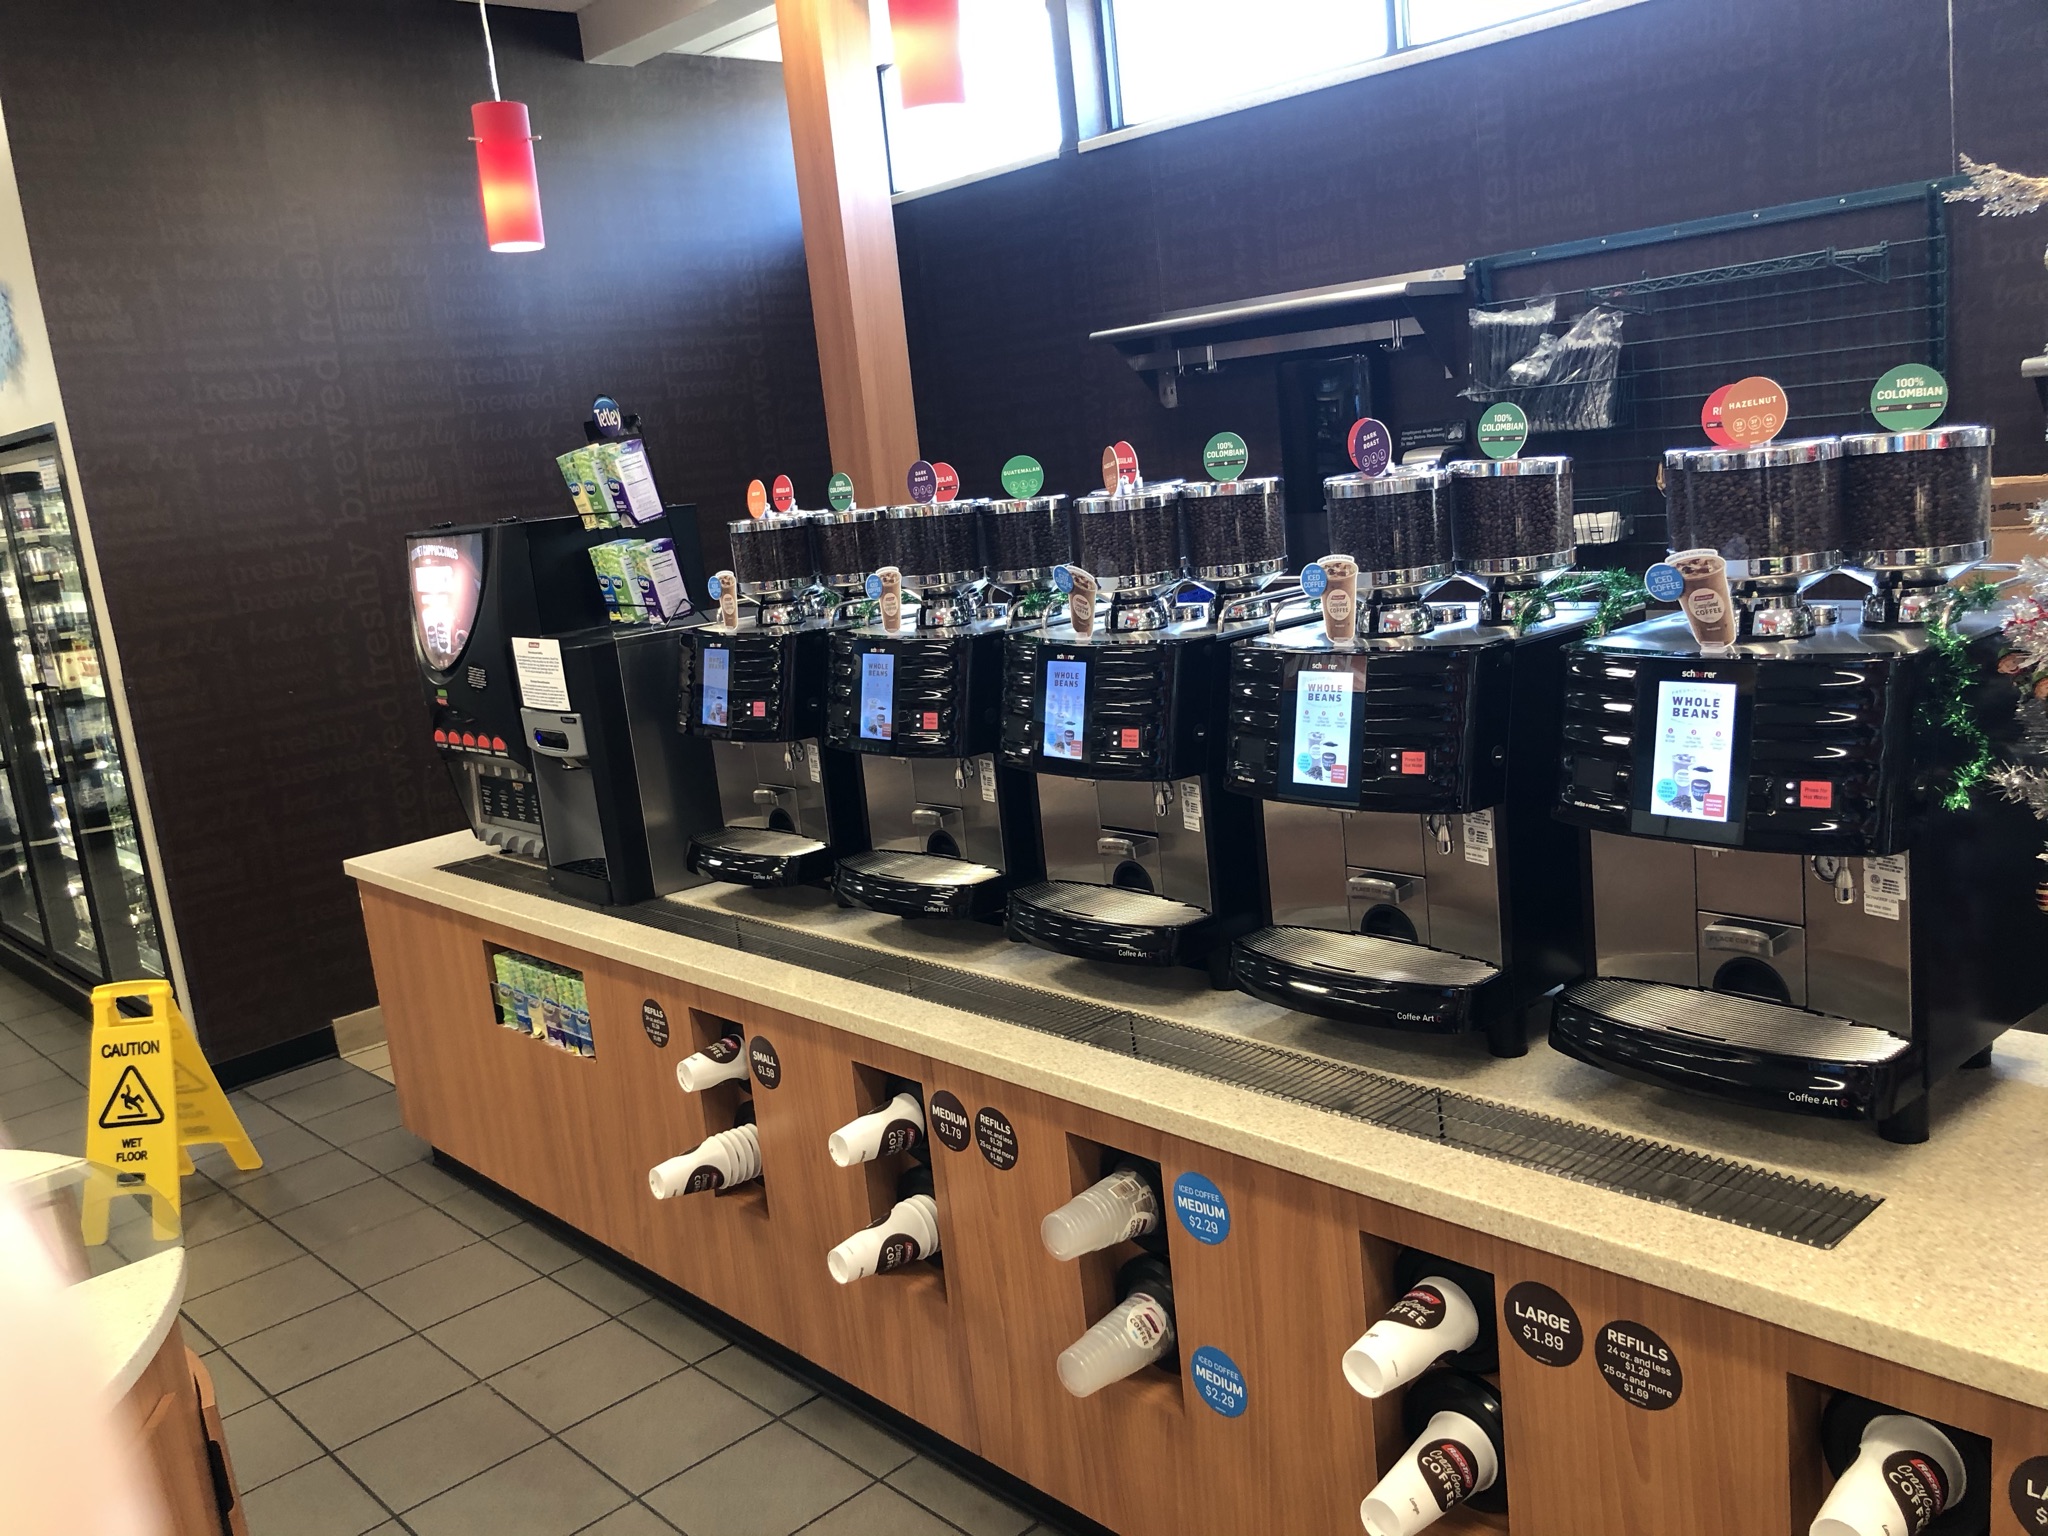 Available property at RaceTrac Coffee Station